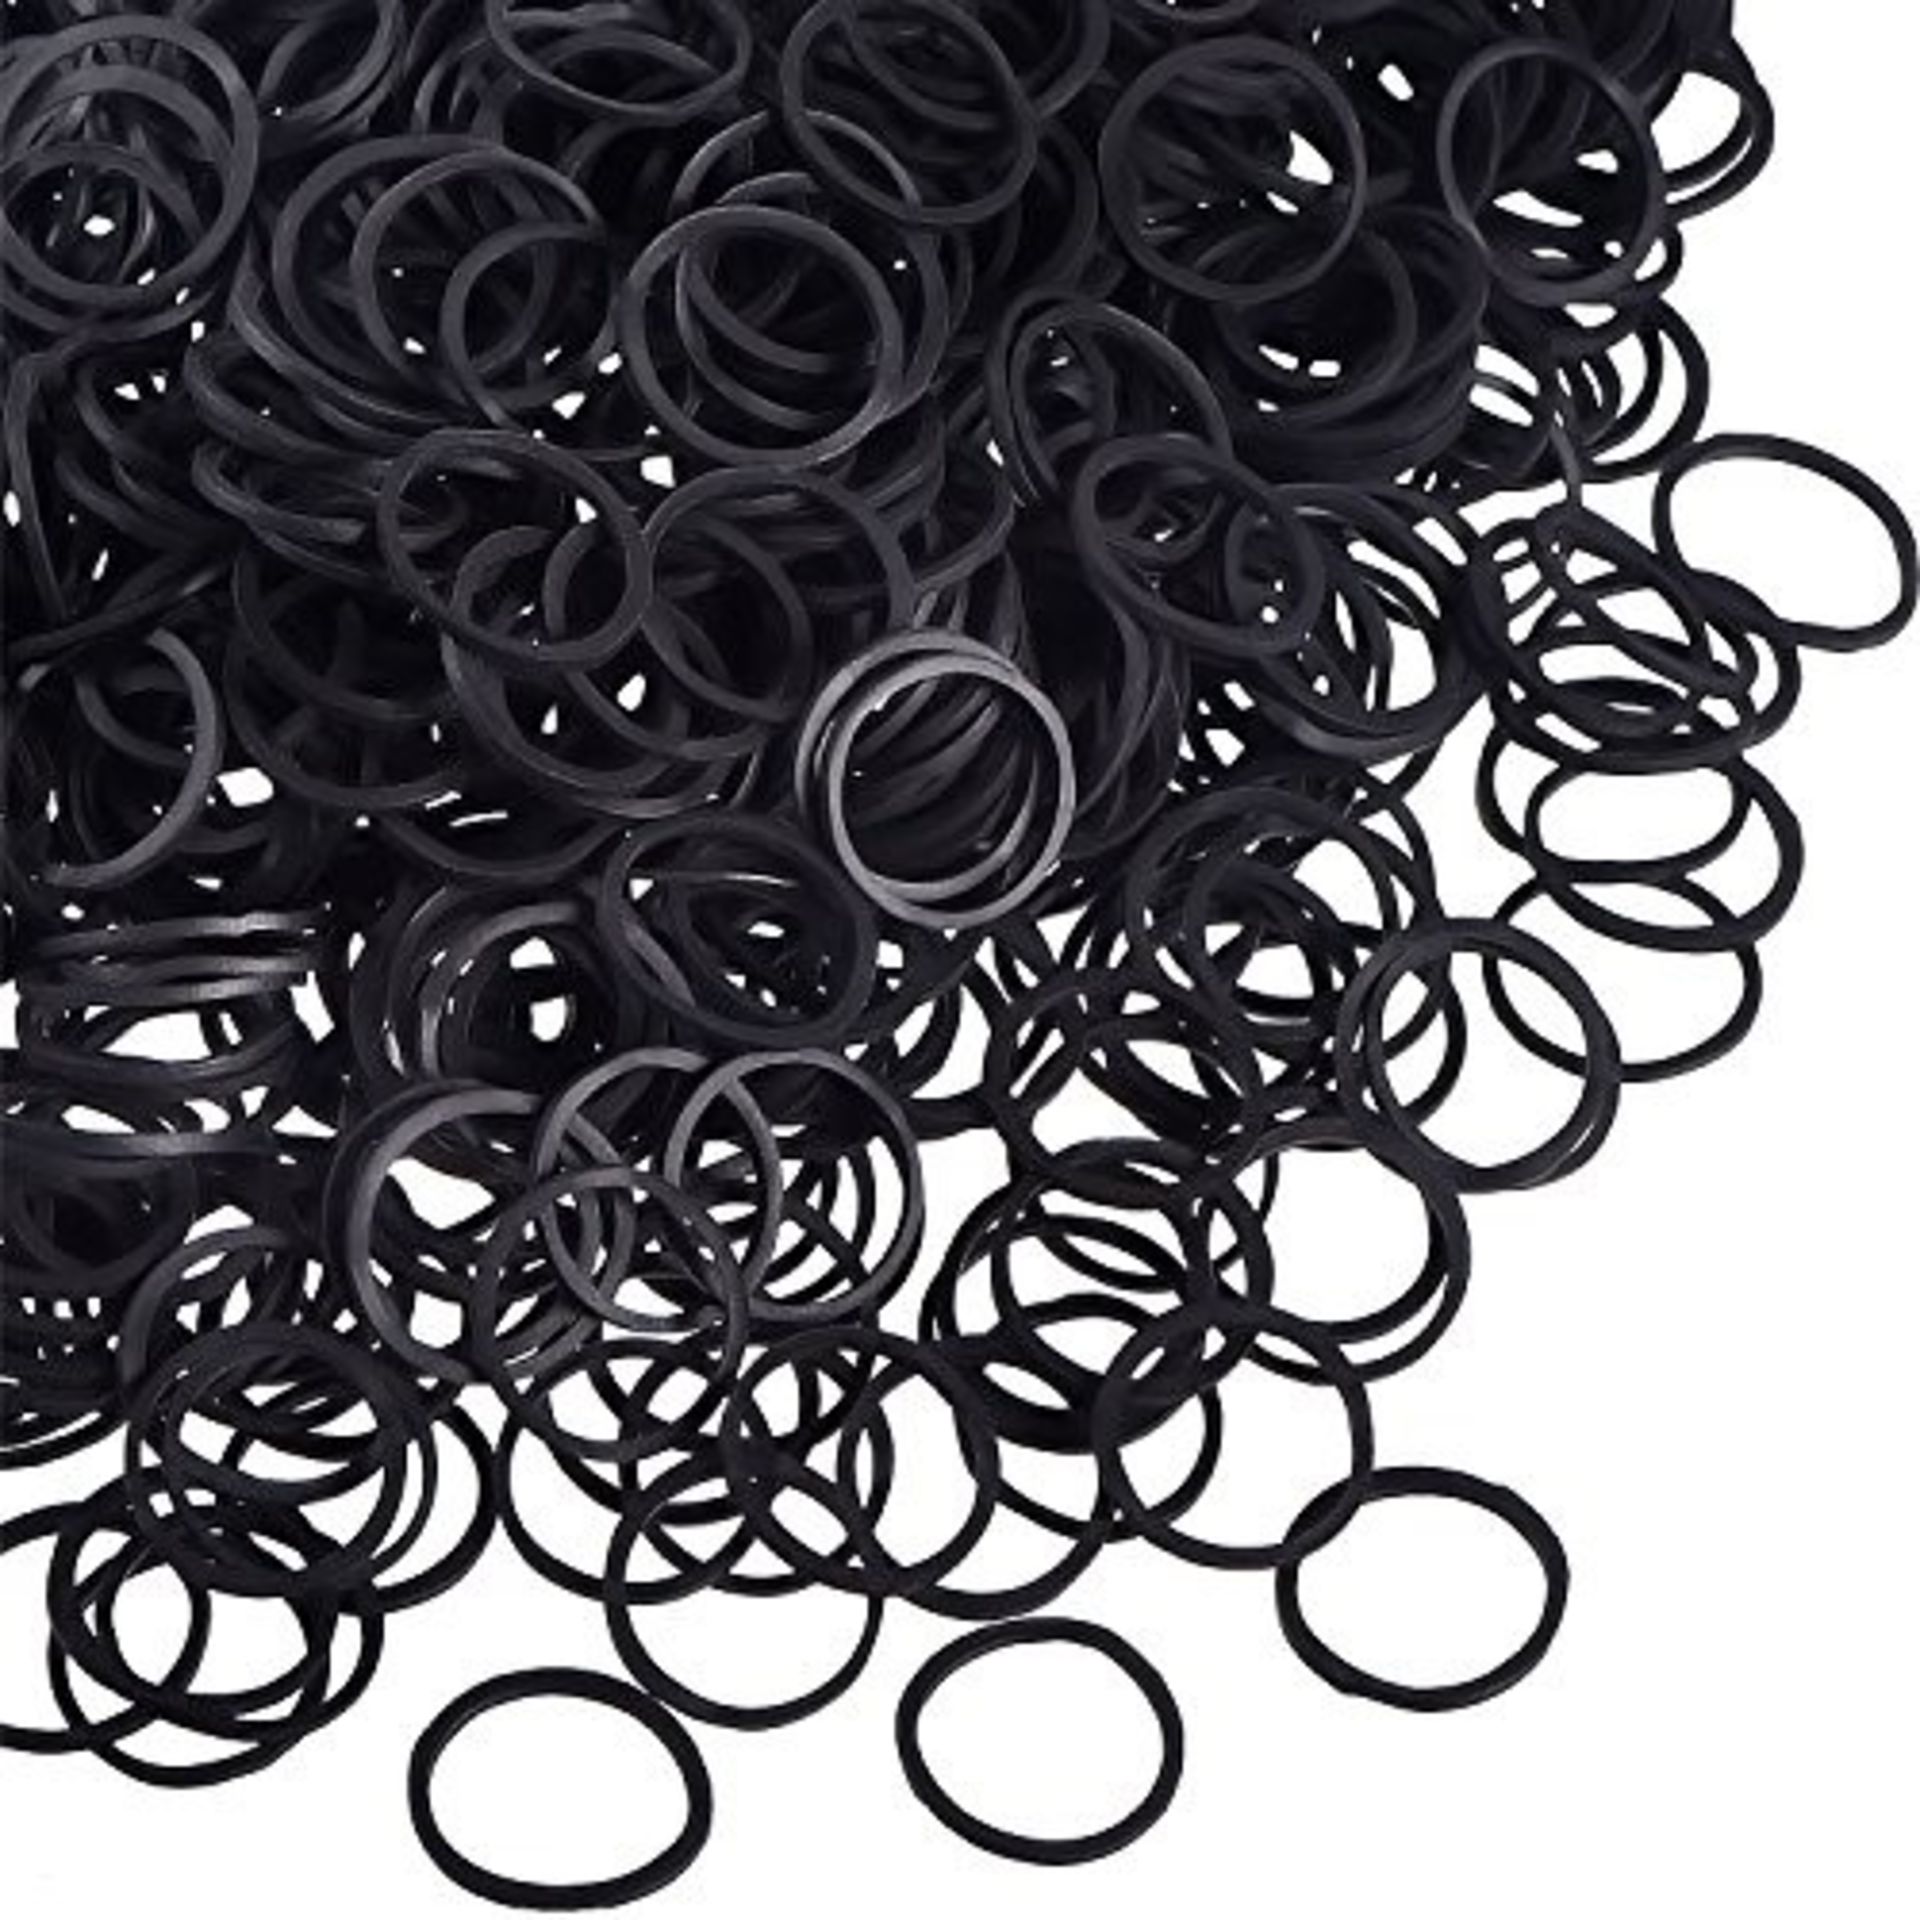 Pack of 1000 Mini Rubber Bands Soft Elastic Bands for Kids Hair, Braids Hair, Wedding